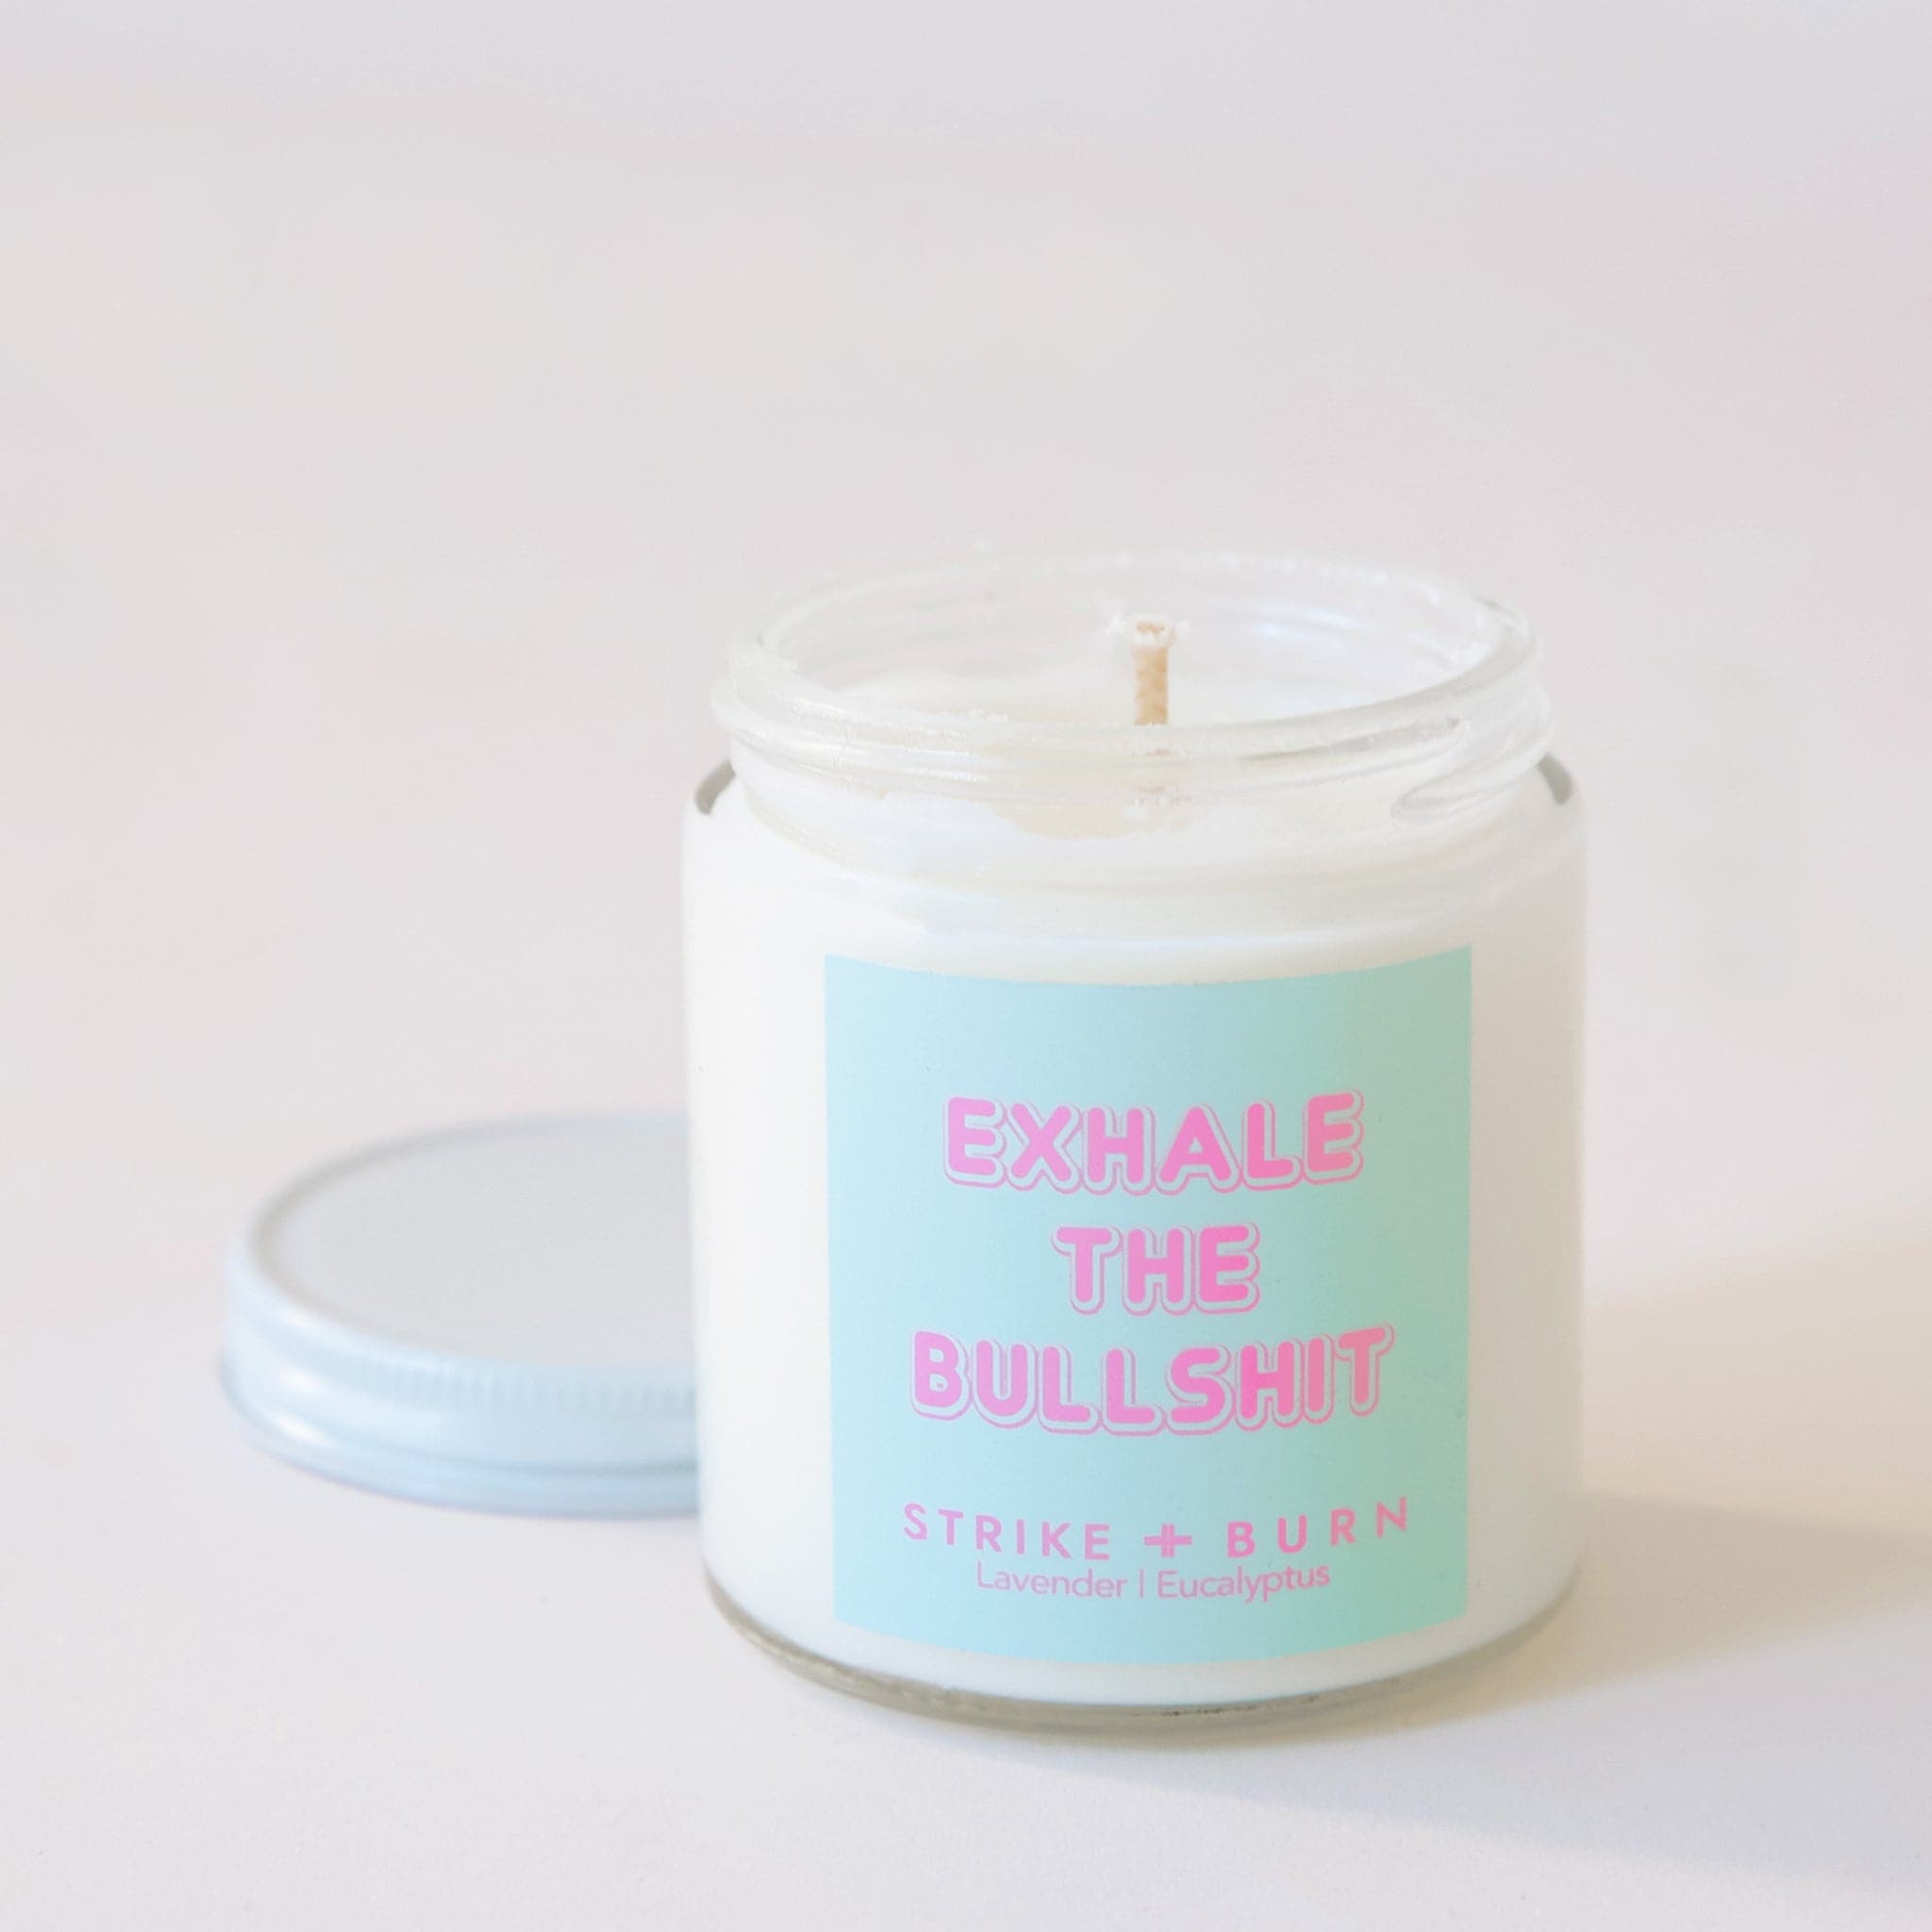 Clear, glass jar candle with white metal lid. Label says "Exhale the bullshit" in pink with a aqua colored background.